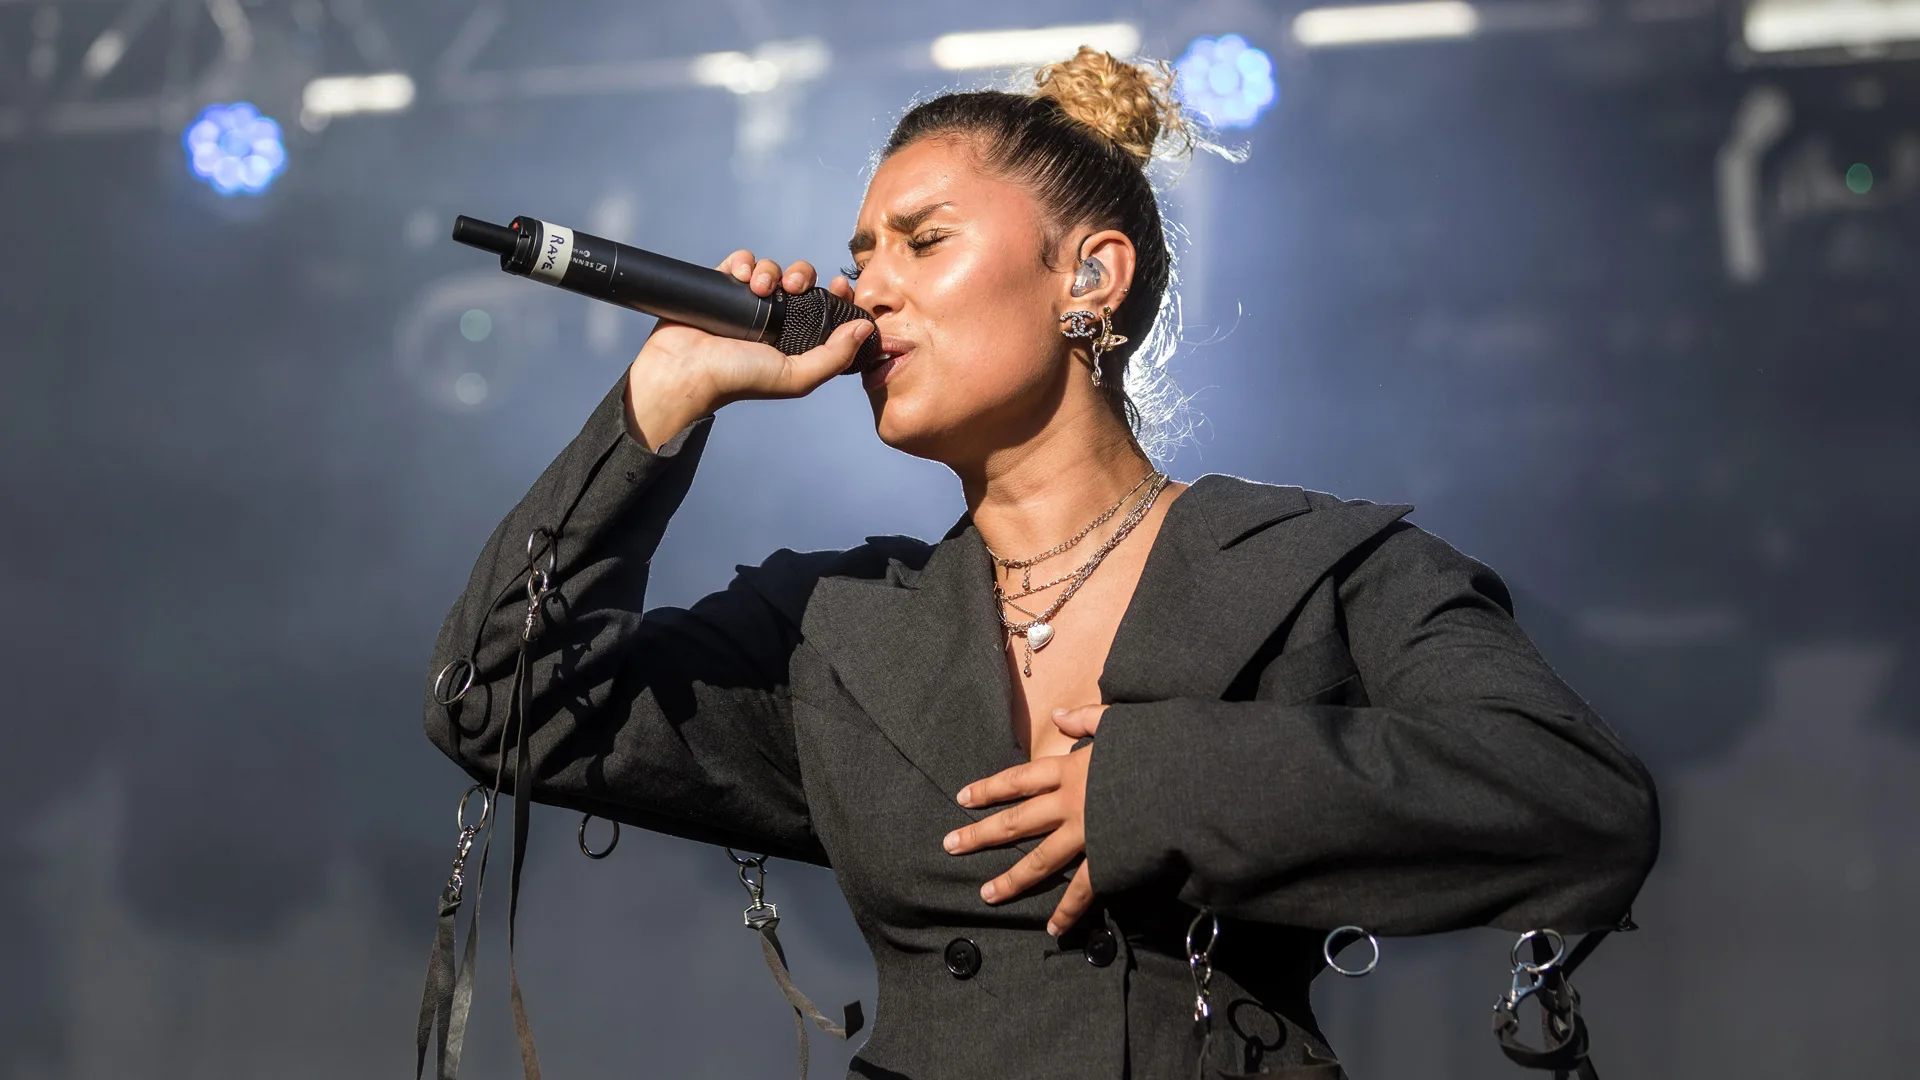 A photograph of the singer Raye singing into a microphone with her eyes closed, wearing a black jacket against a stage background.